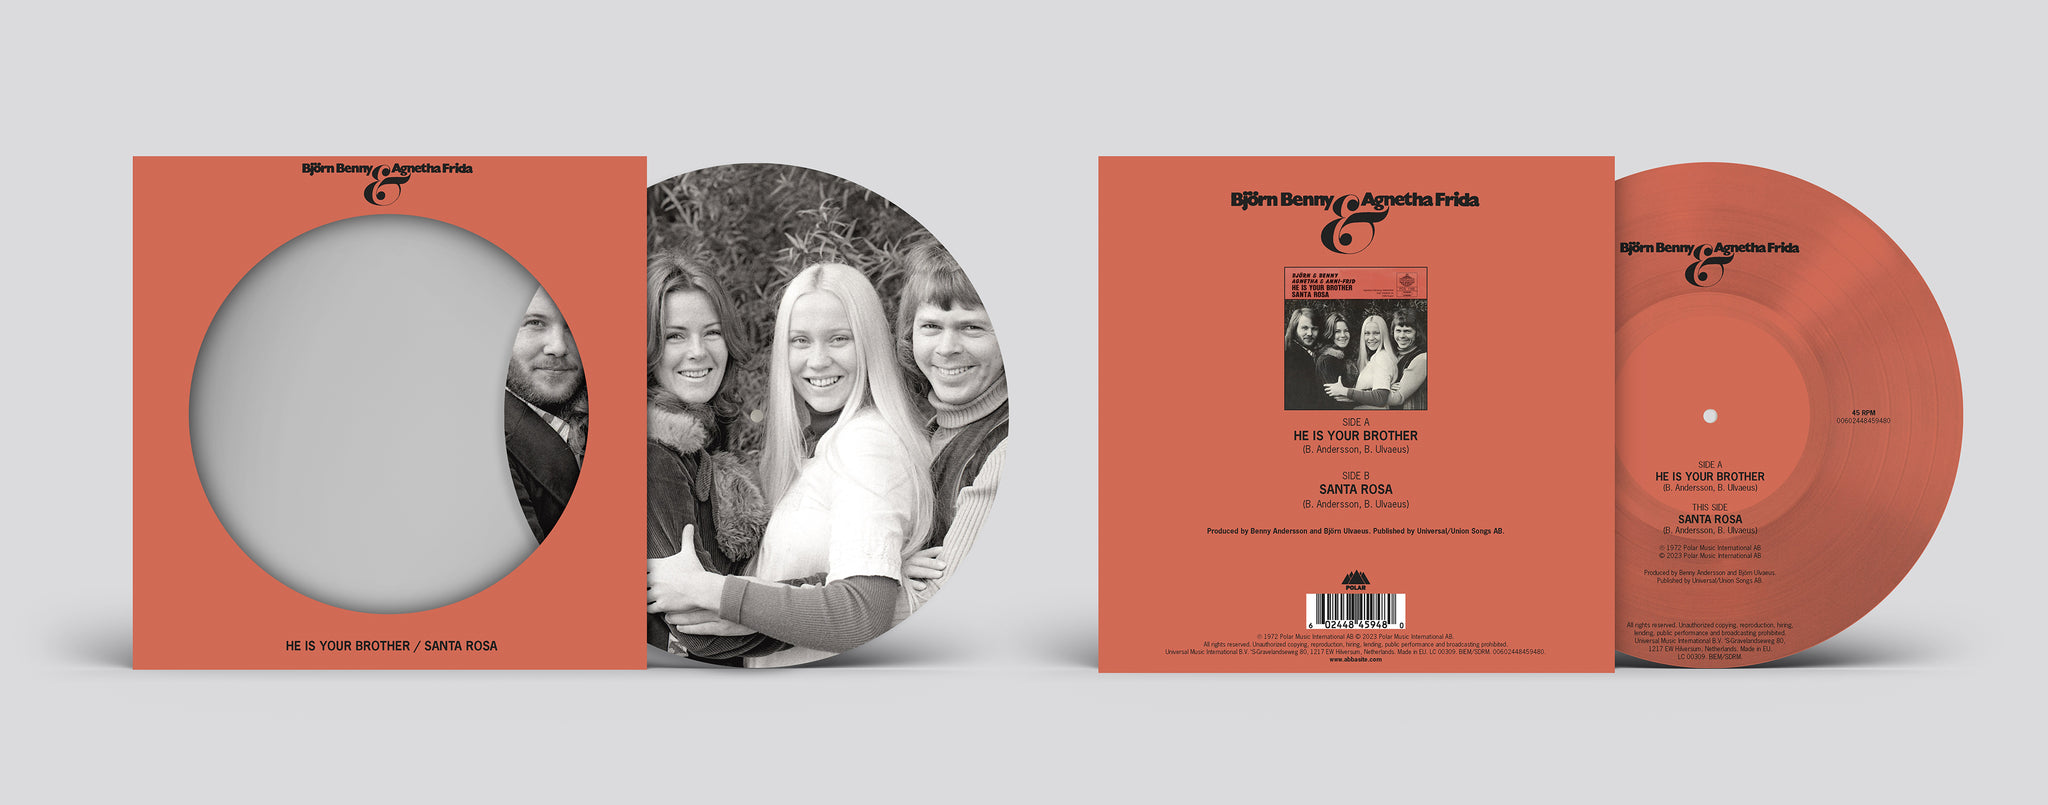 ABBA - He Is Your Brother / Santa Rosa - 7" - 50th Anniversary Picture Disc Vinyl